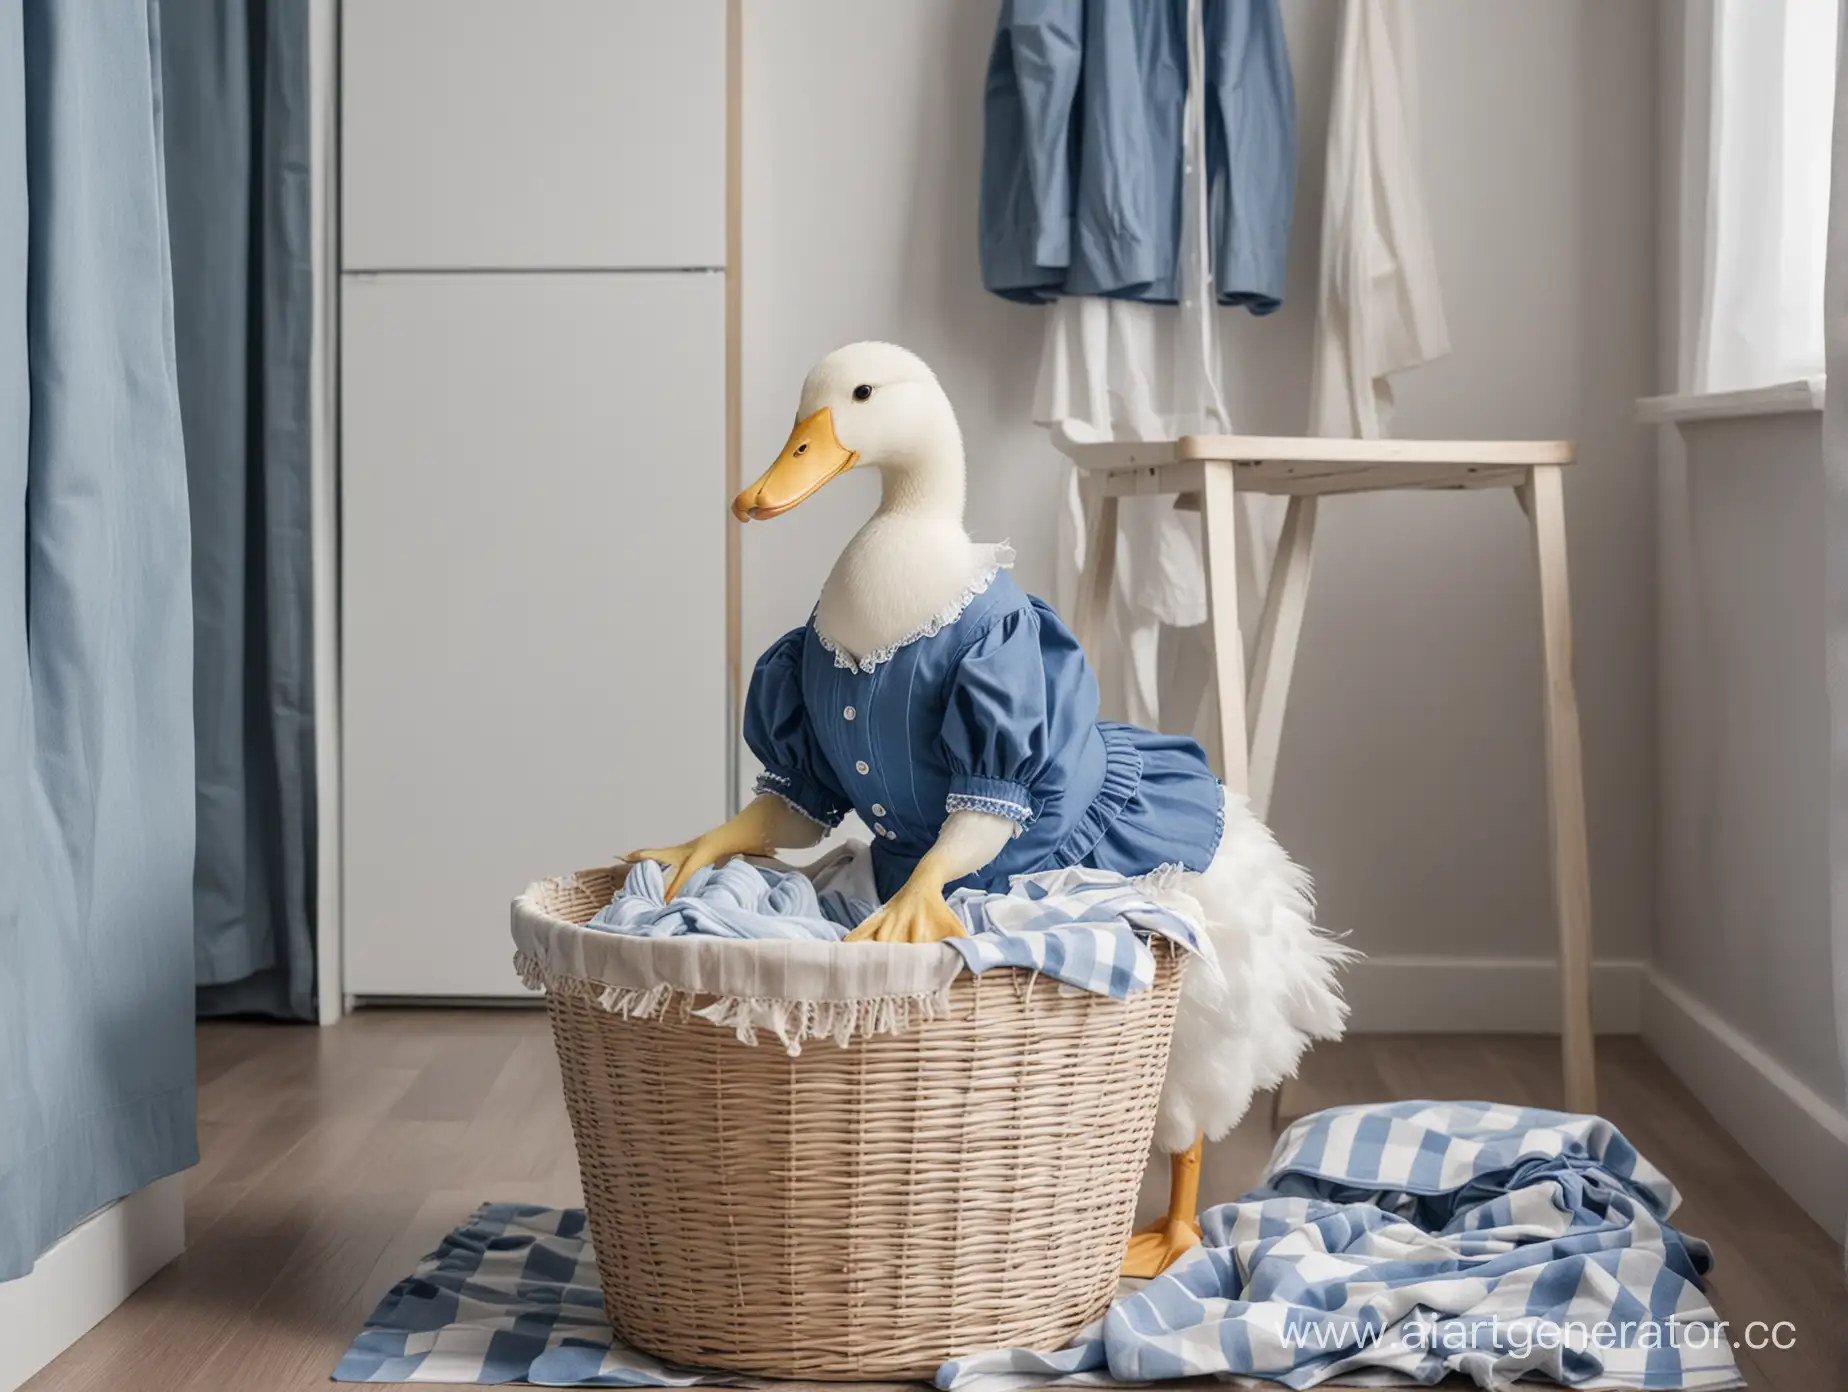 BlueClad-Maid-Duck-with-Laundry-Basket-in-Urban-Apartment